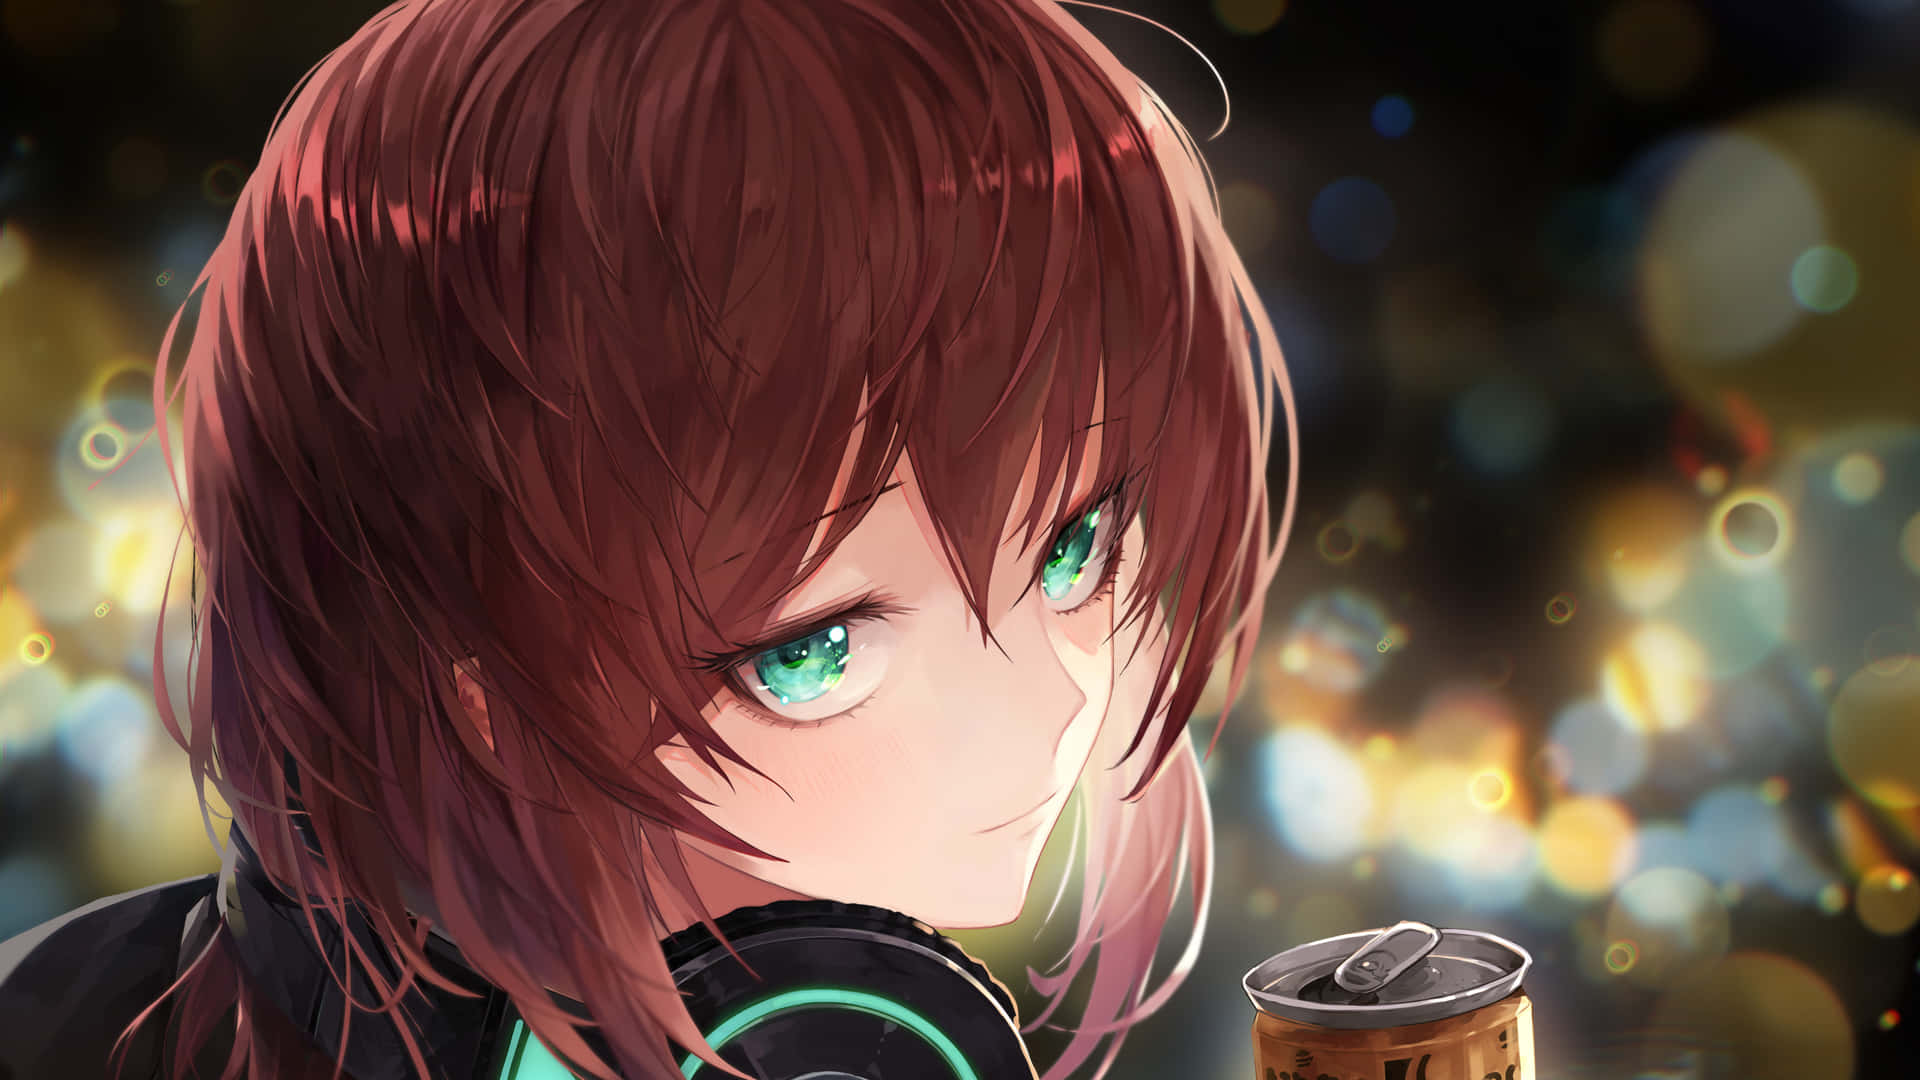 Anime Girl With Green Eyes Wallpaper